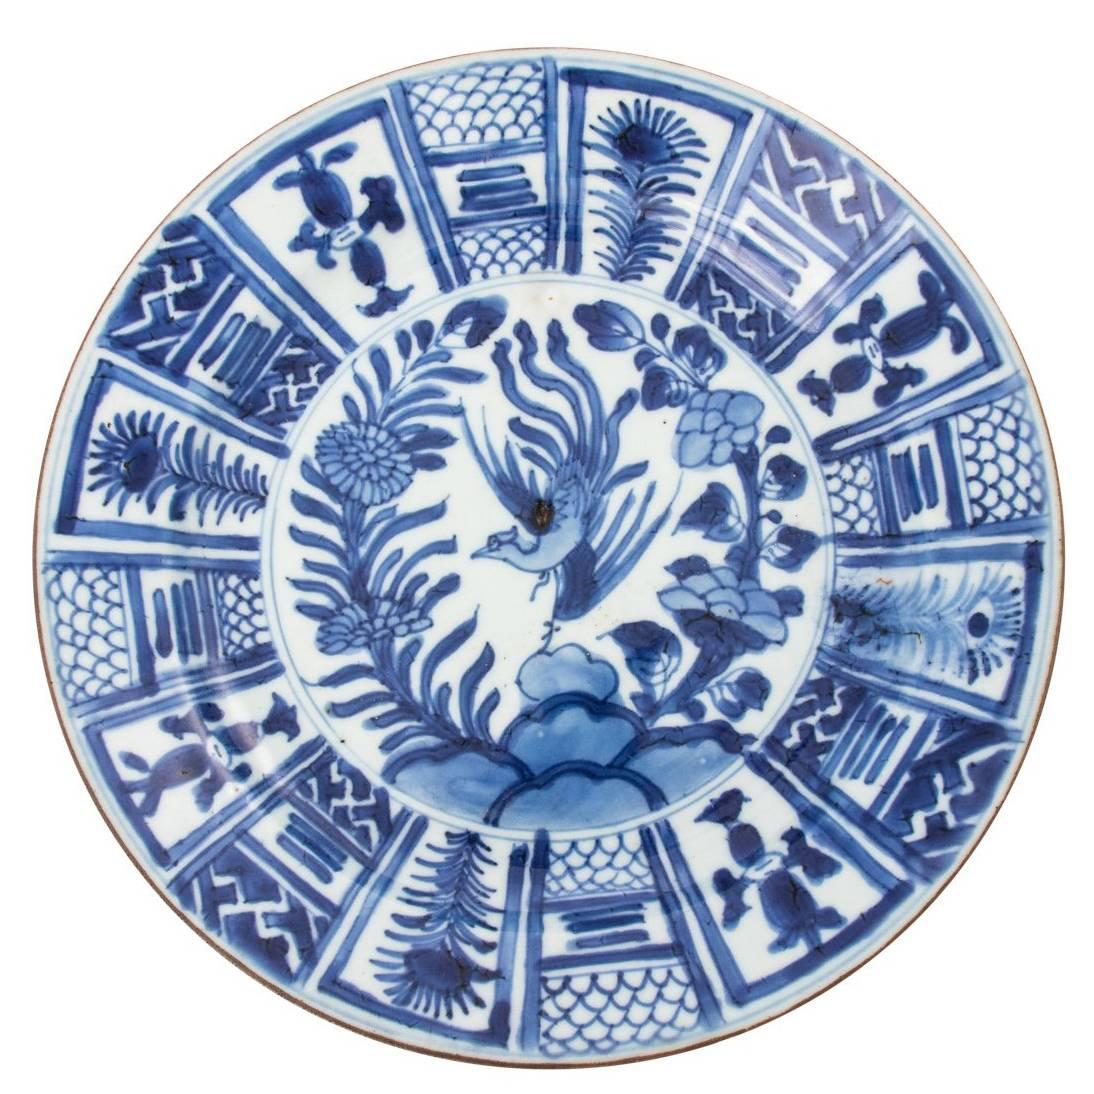 Qing Dynasty Porcelain Plate For Sale